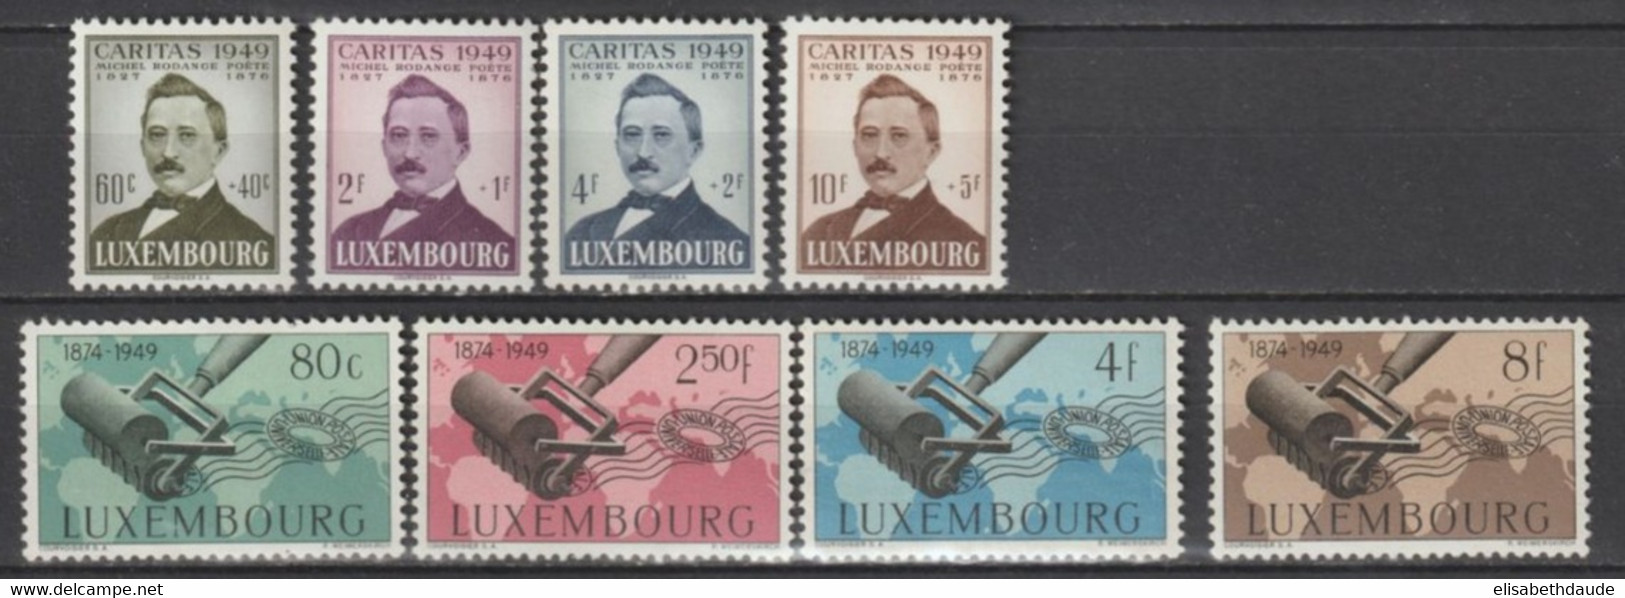 LUXEMBOURG - 1949 - ANNEE COMPLETE YVERT N°425/432 ** MNH (427 *MLH) - COTE = 60 EUR - Full Years